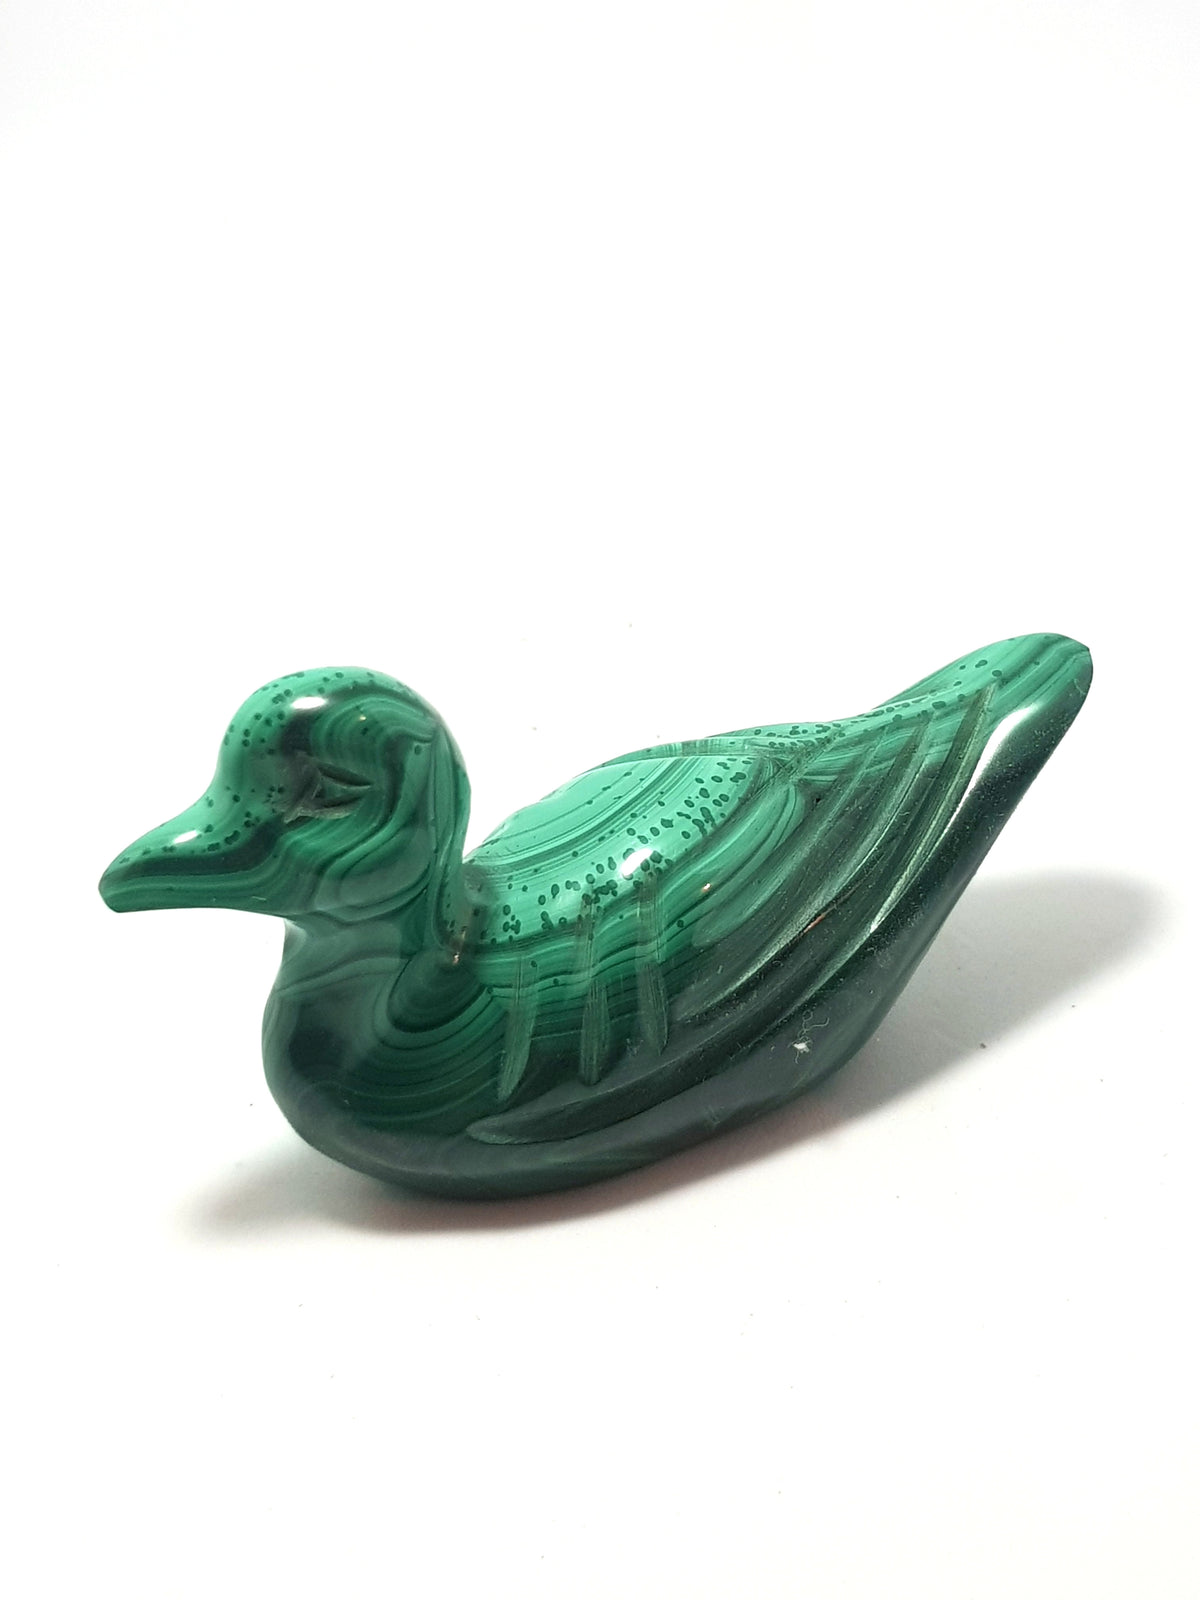 carved duck miniature. Carved from malachite. Dark to light green banded.